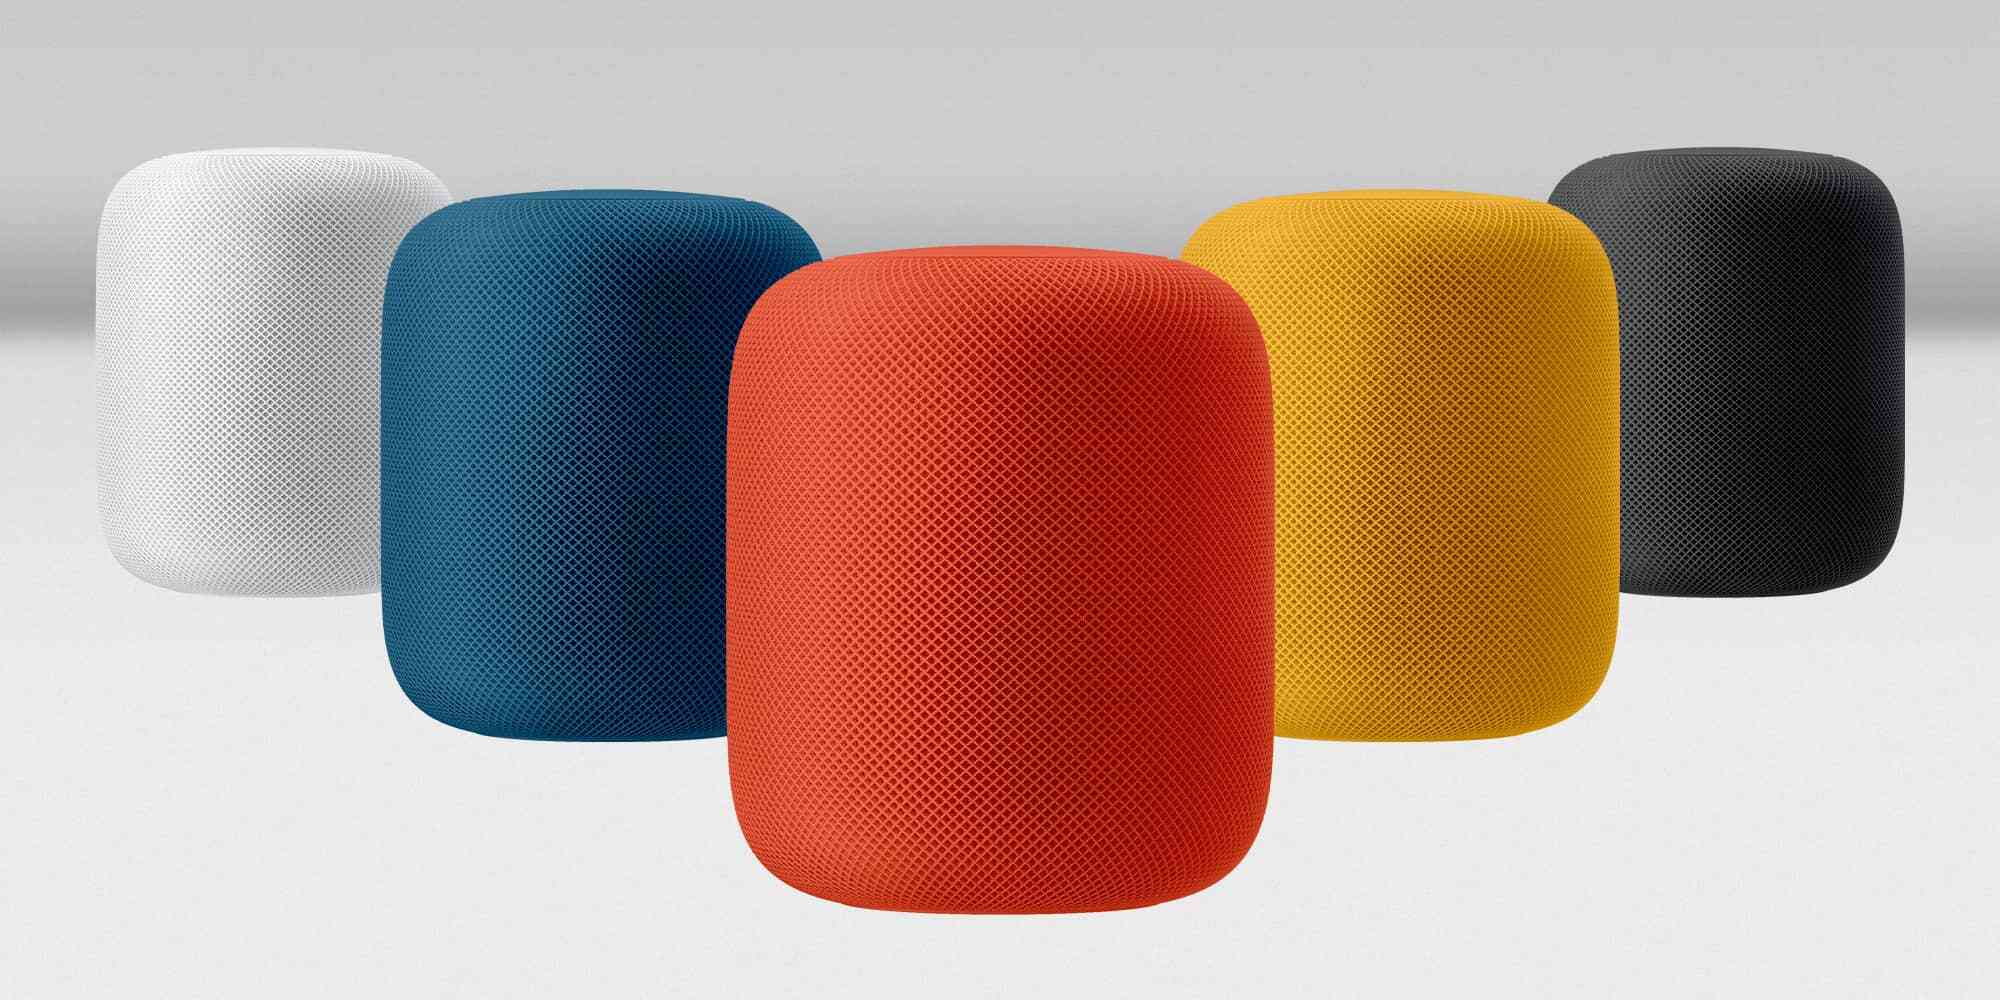 Echo Is A $199 Connected Speaker Packing An Always-On Siri